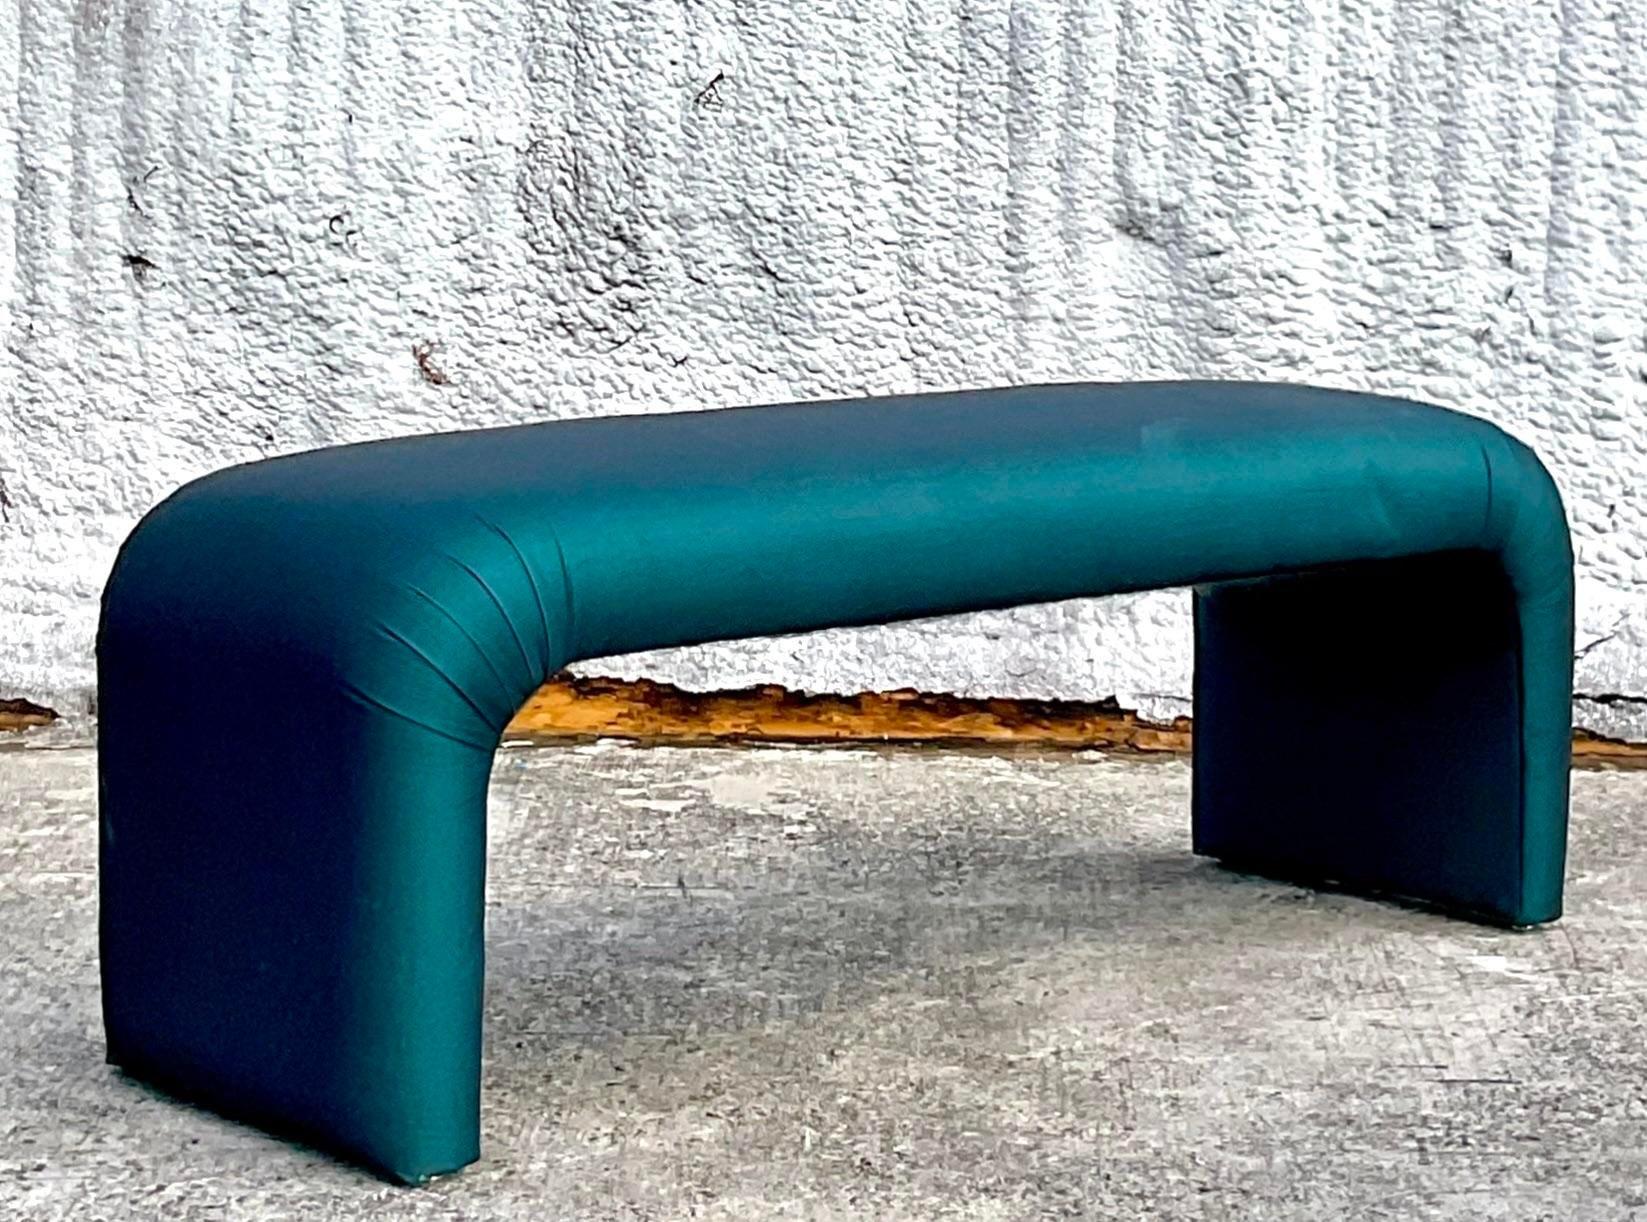 A fabulous vintage Boho upholstered bench. A chic waterfall shape in a brilliant green color. Acquired from a CT estate.